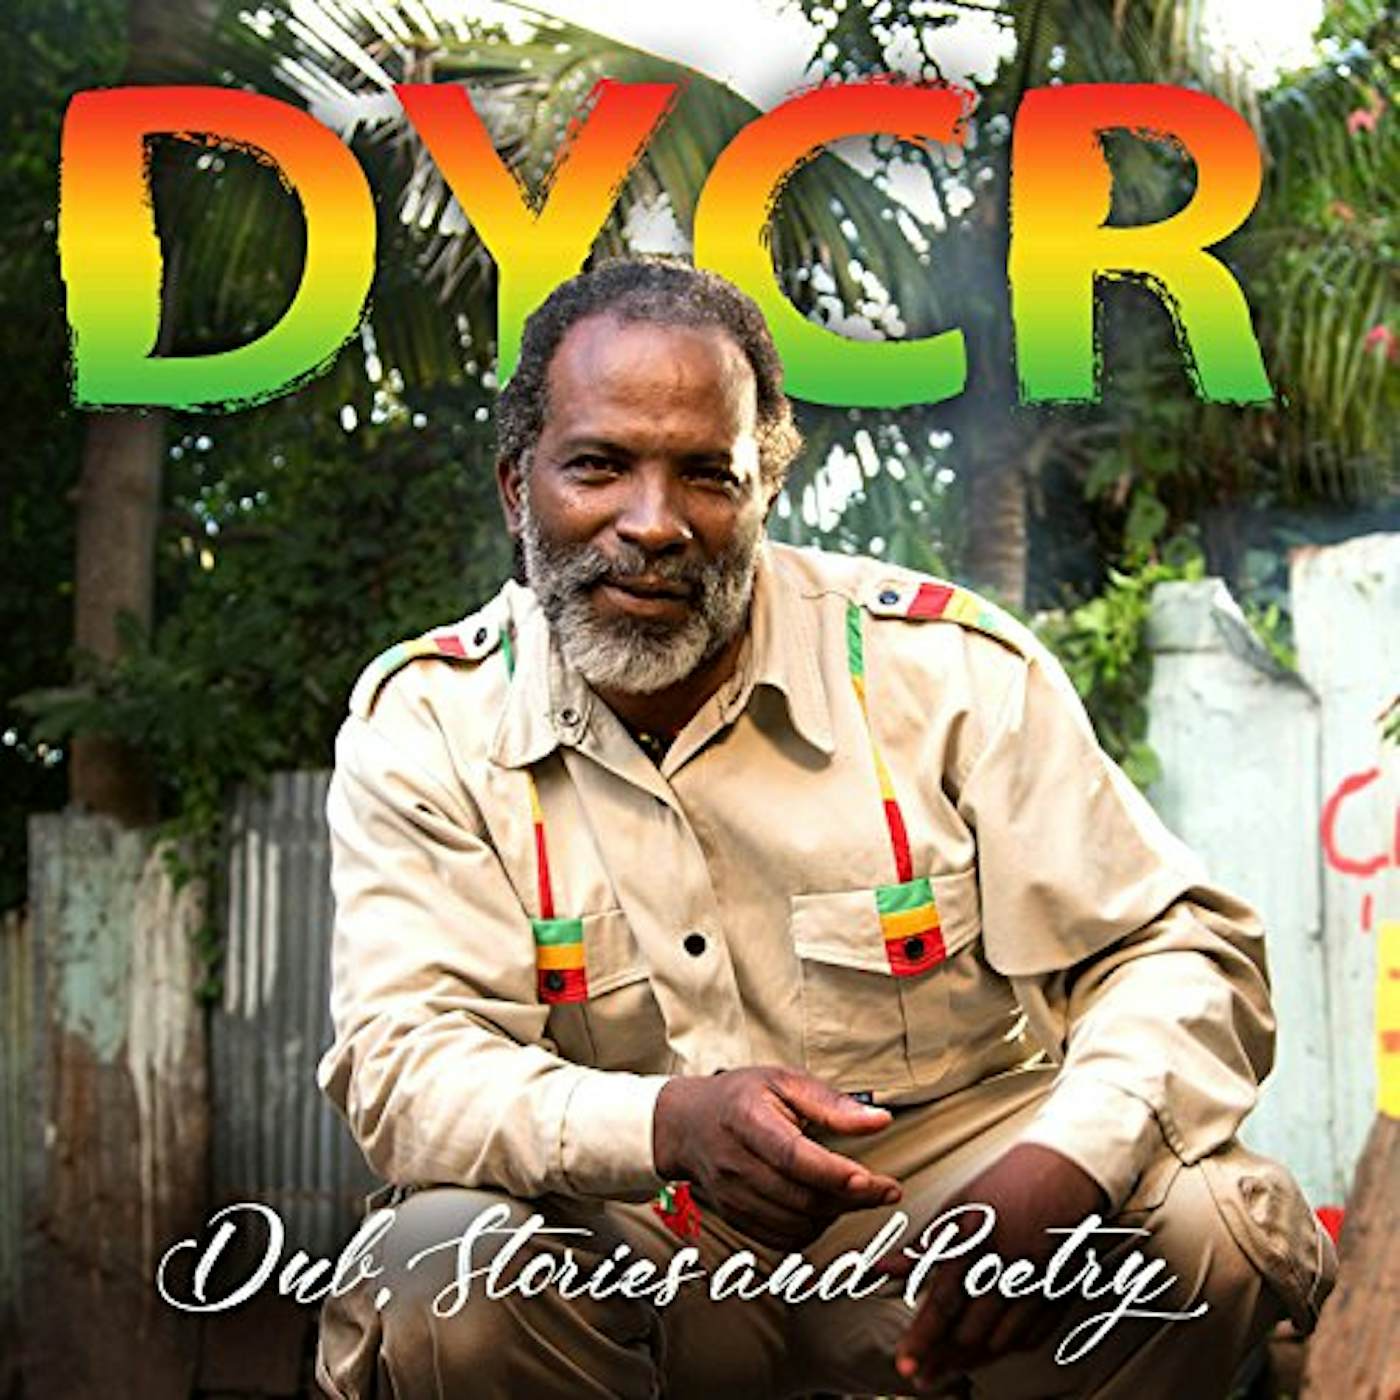 Dycr DUB STORIES & POETRY CD